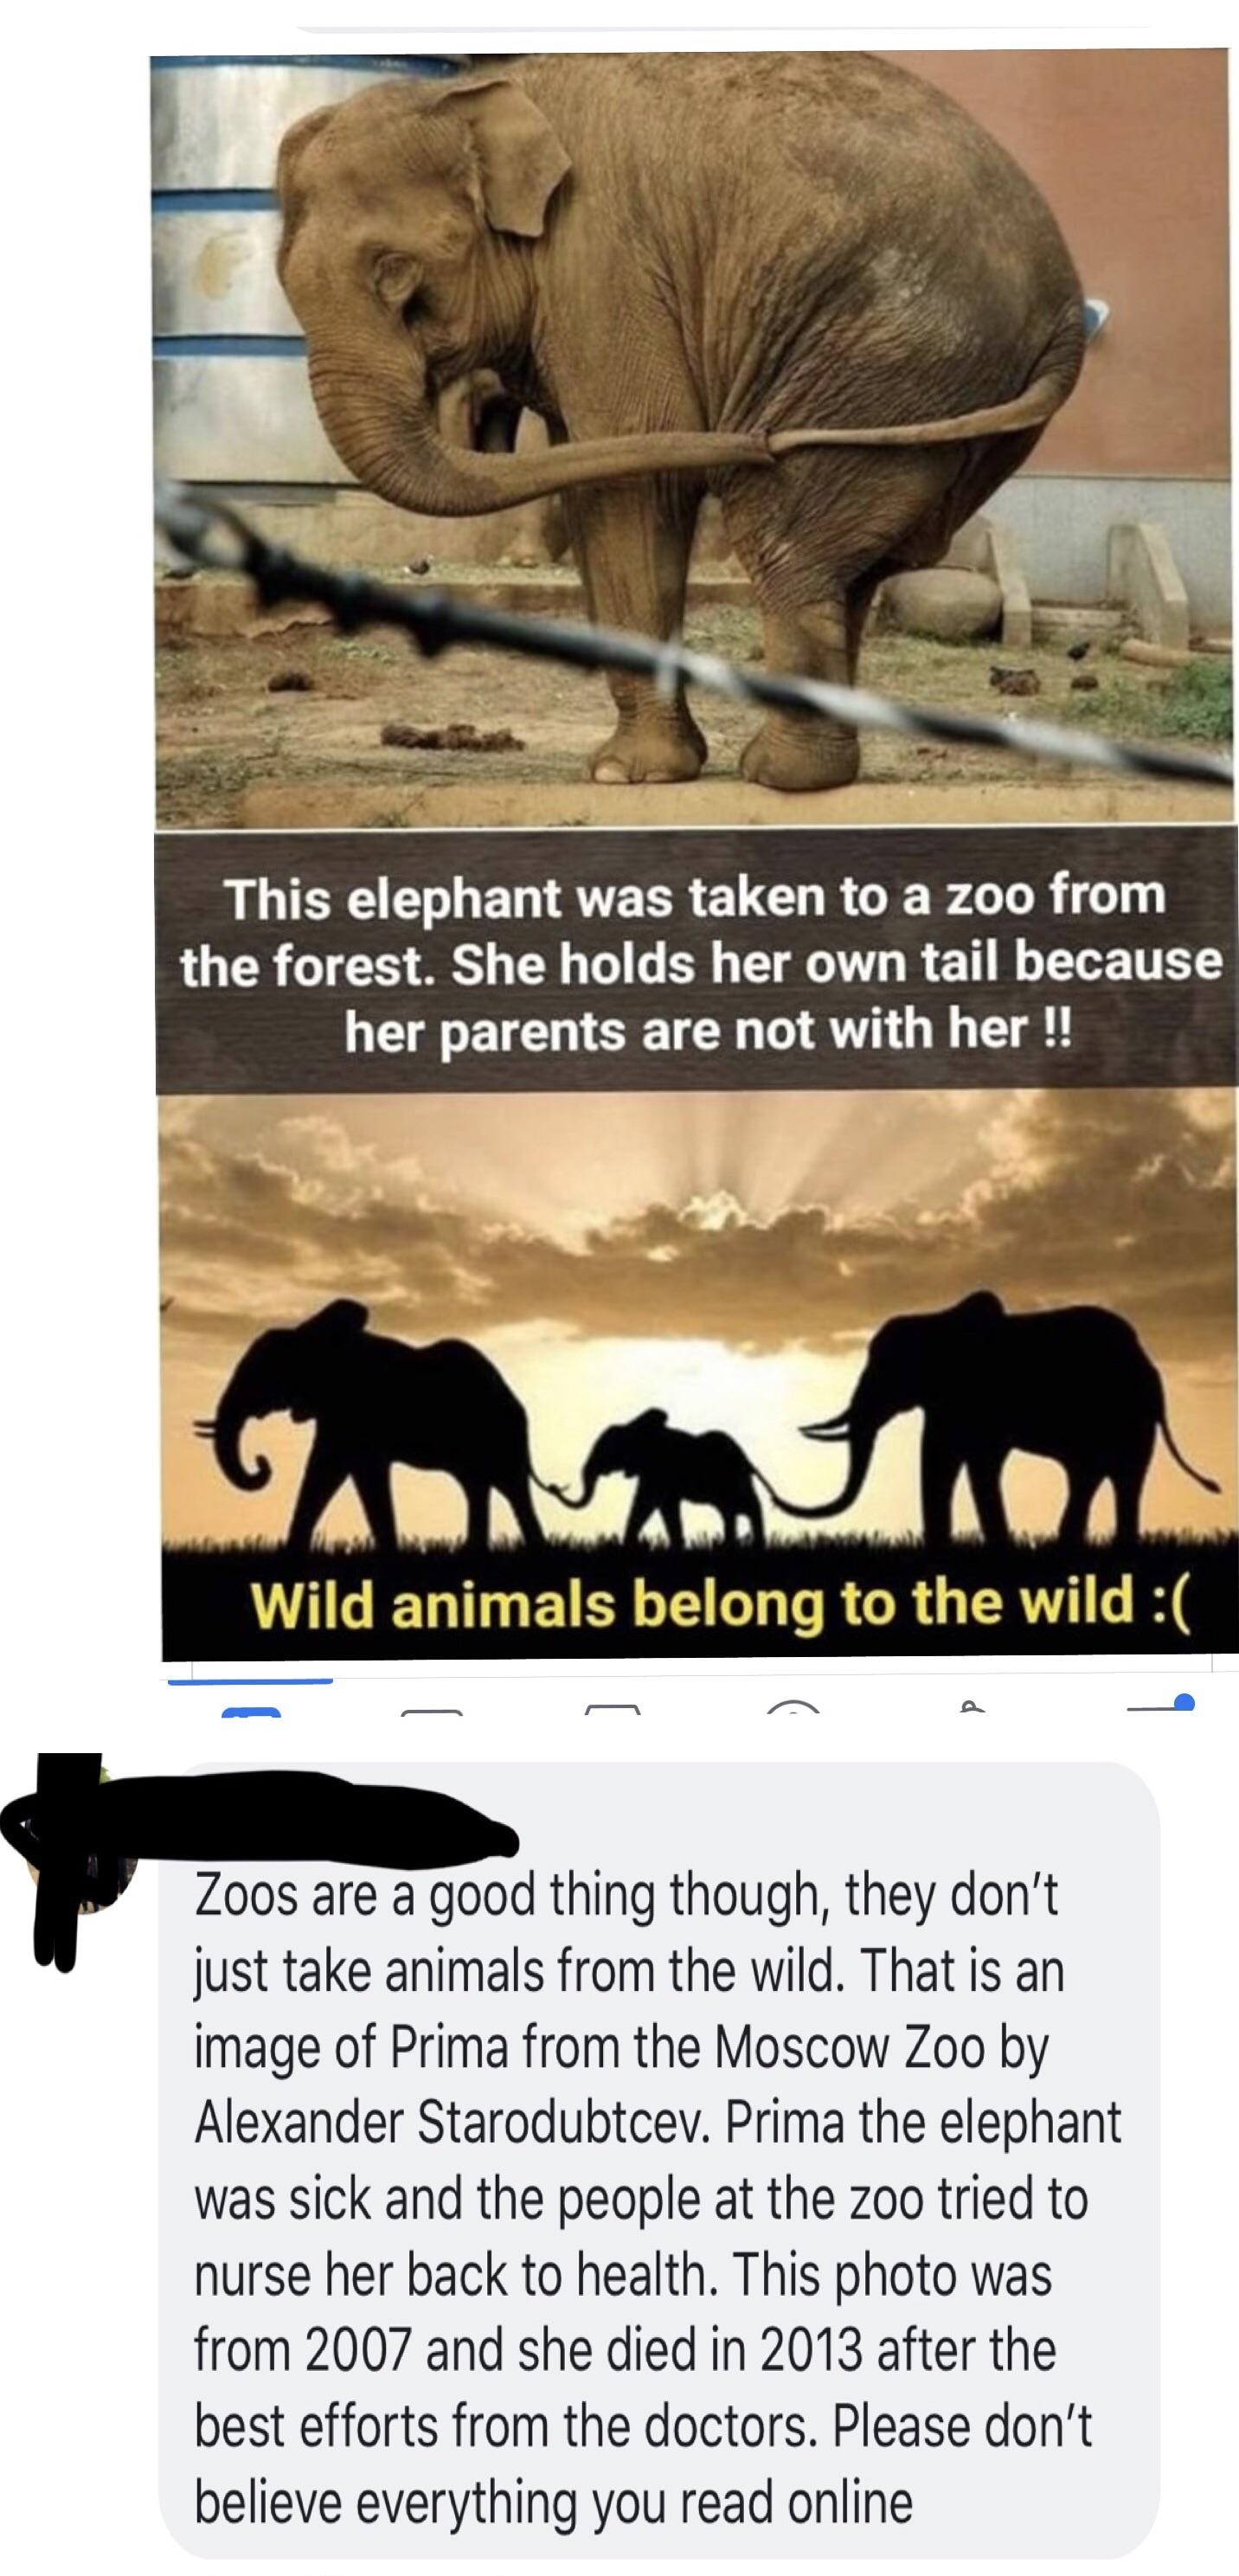 motivation from animals - This elephant was taken to a zoo from the forest. She holds her own tail because her parents are not with her !! Wild animals belong to the wild Zoos are a good thing though, they don't just take animals from the wild. That is an